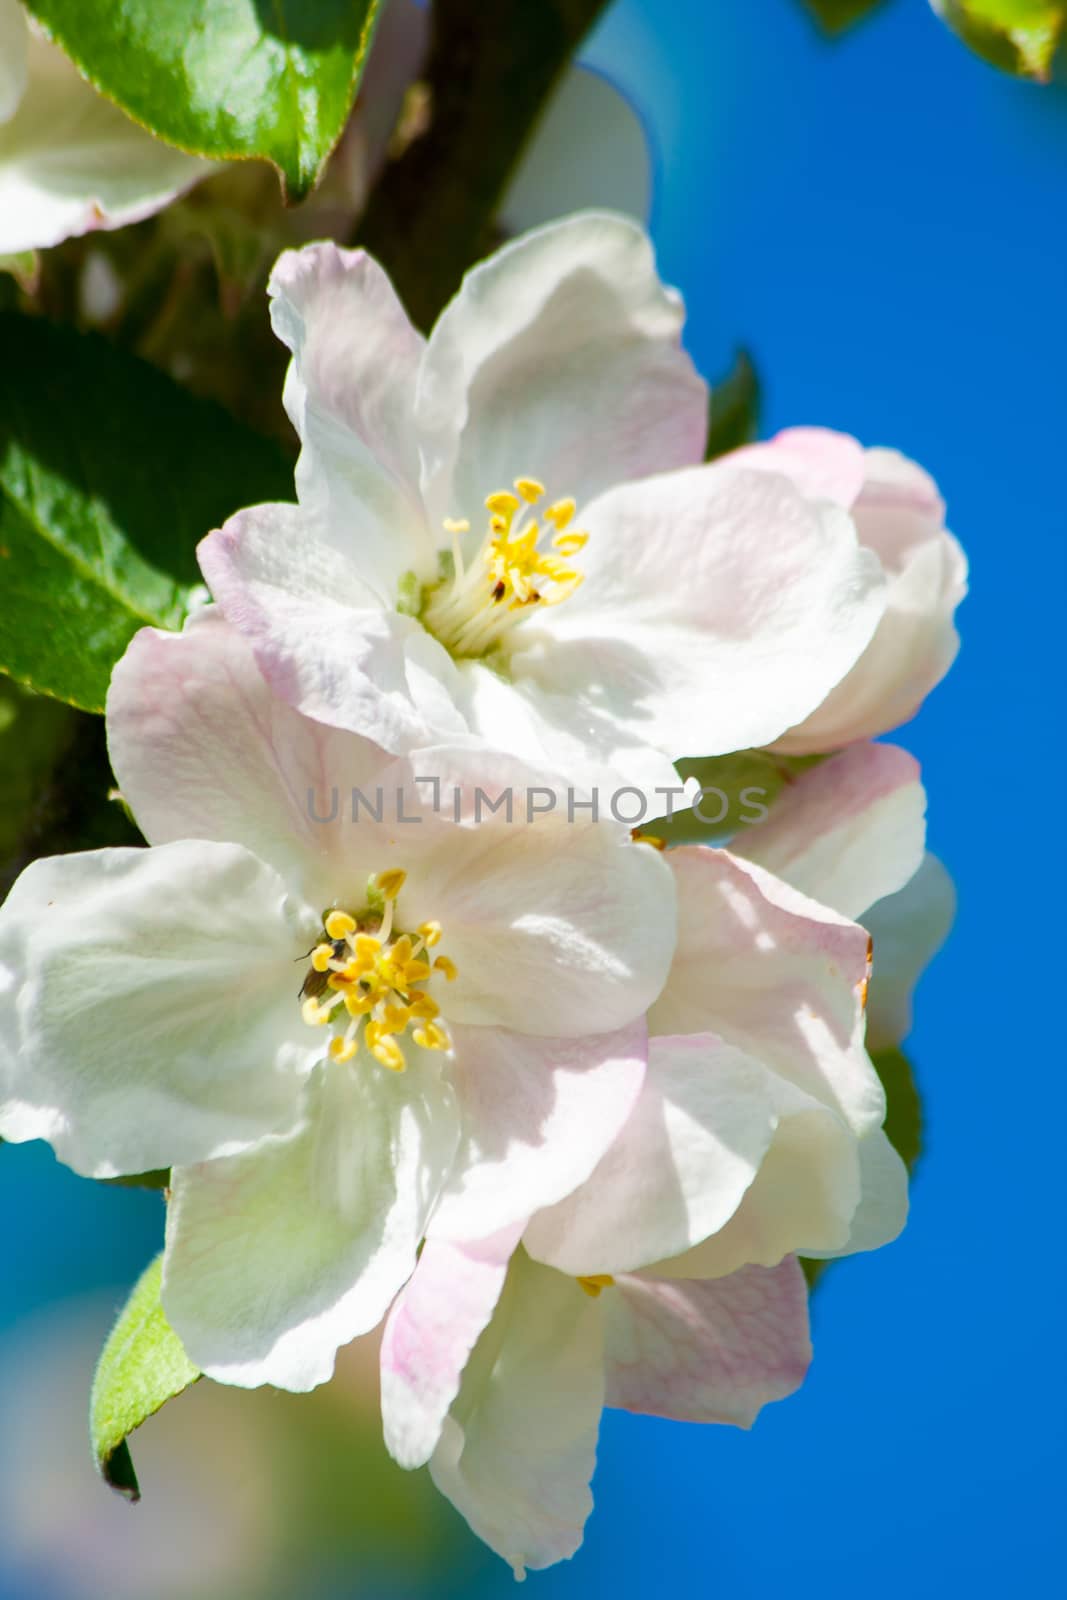 pink and white flowering blossoms of an apple tree